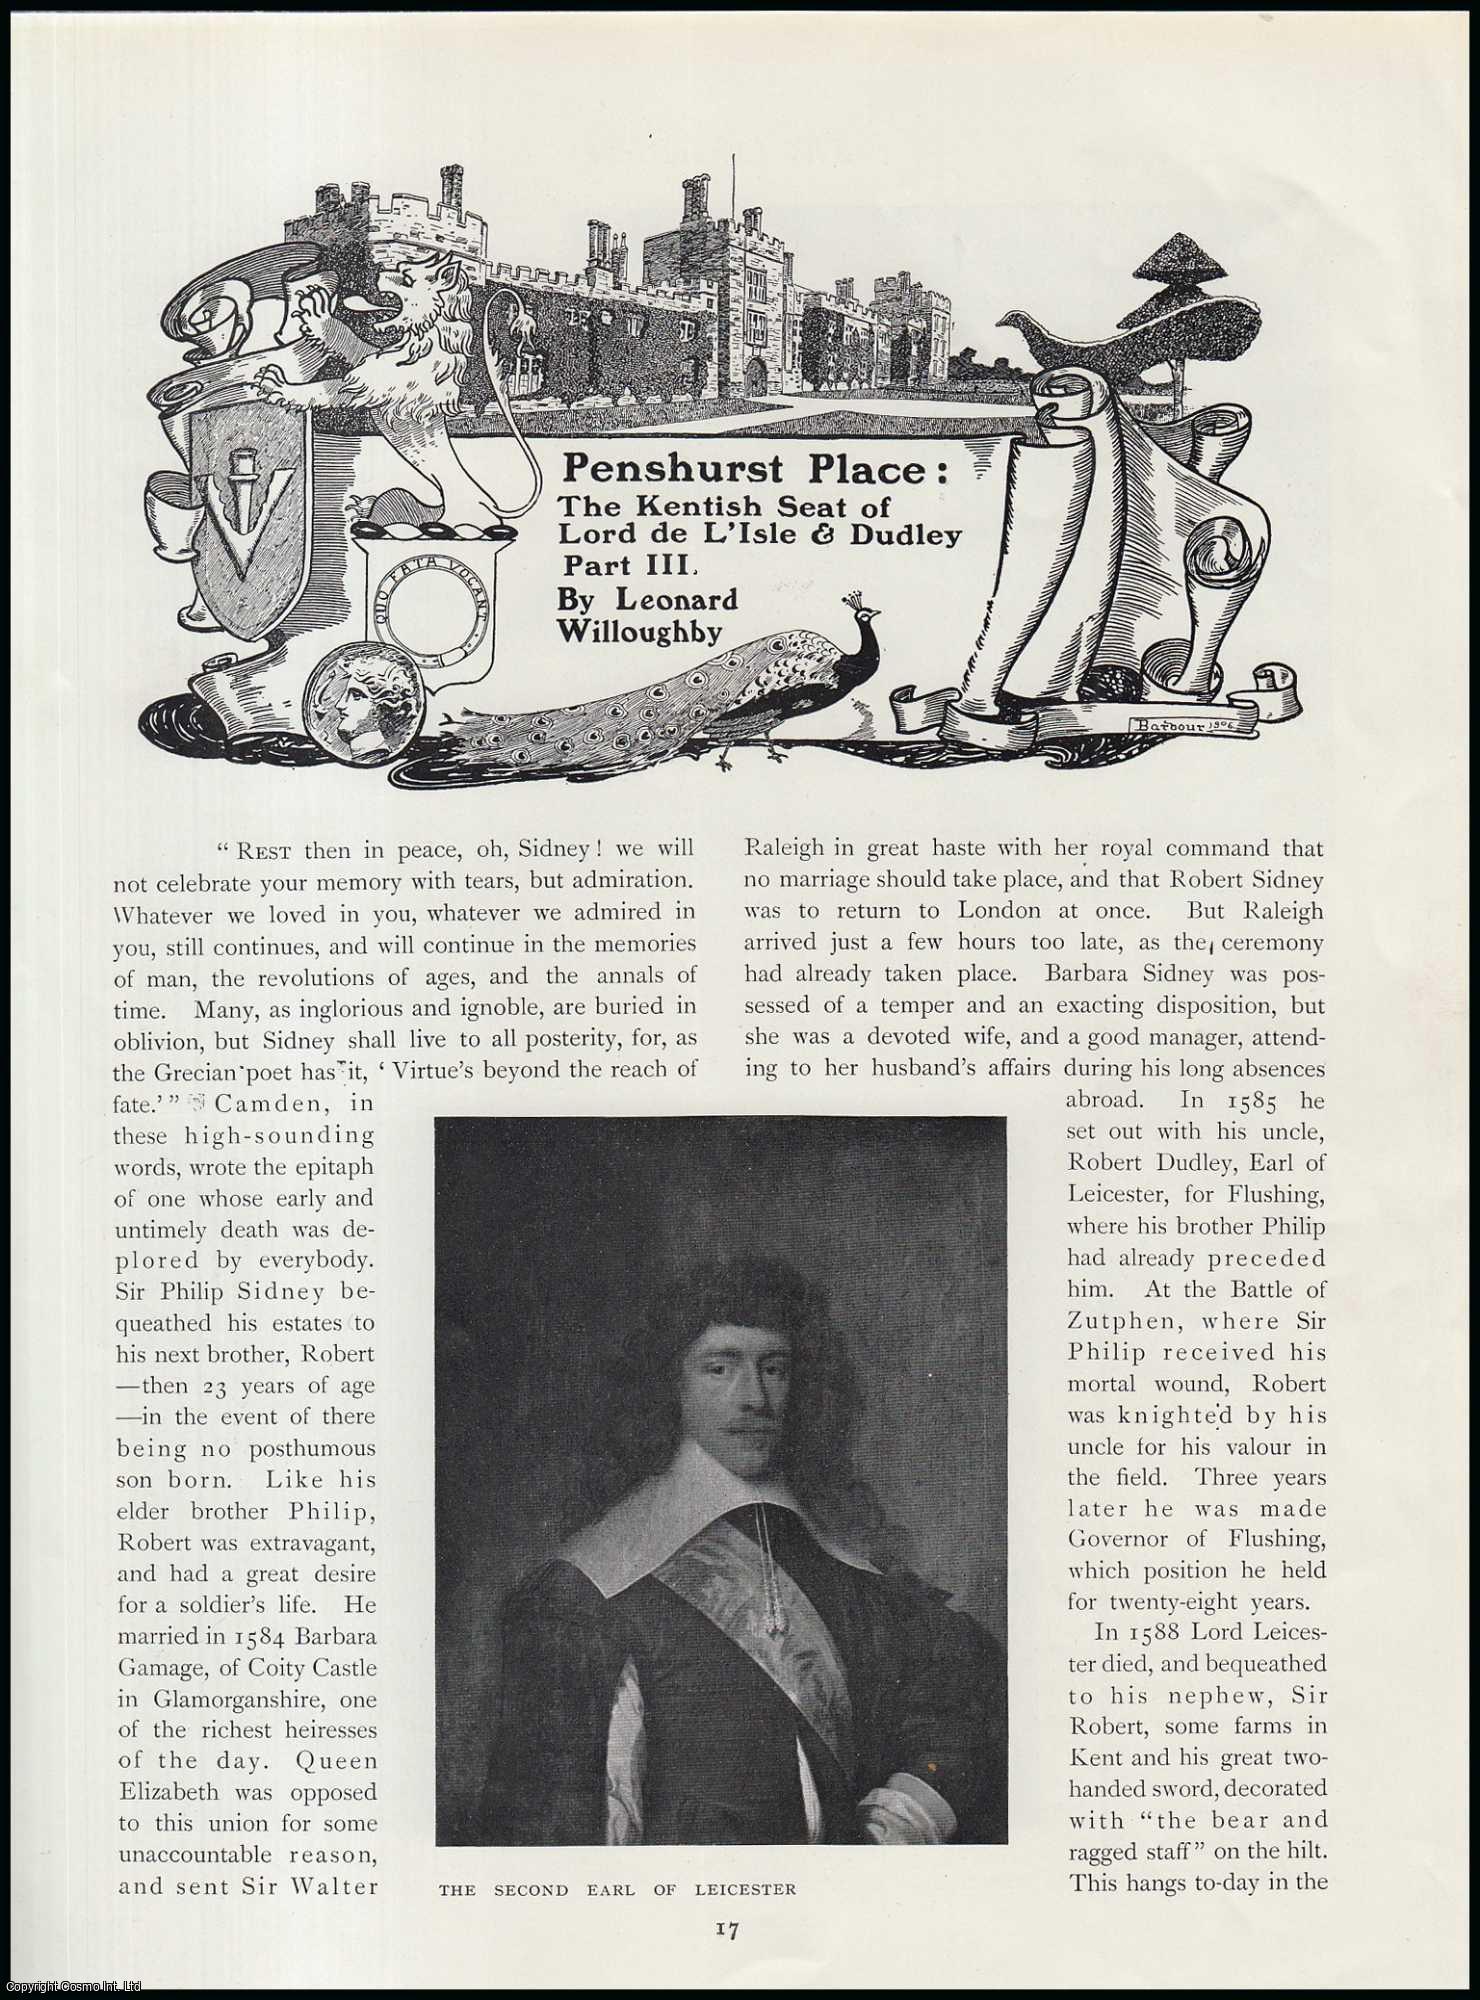 Leonard Willoughby - Penshurst Place (part 3) : The Kentish Seat of Lord de L'Isle & Dudley. An original article from The Connoisseur, 1906.